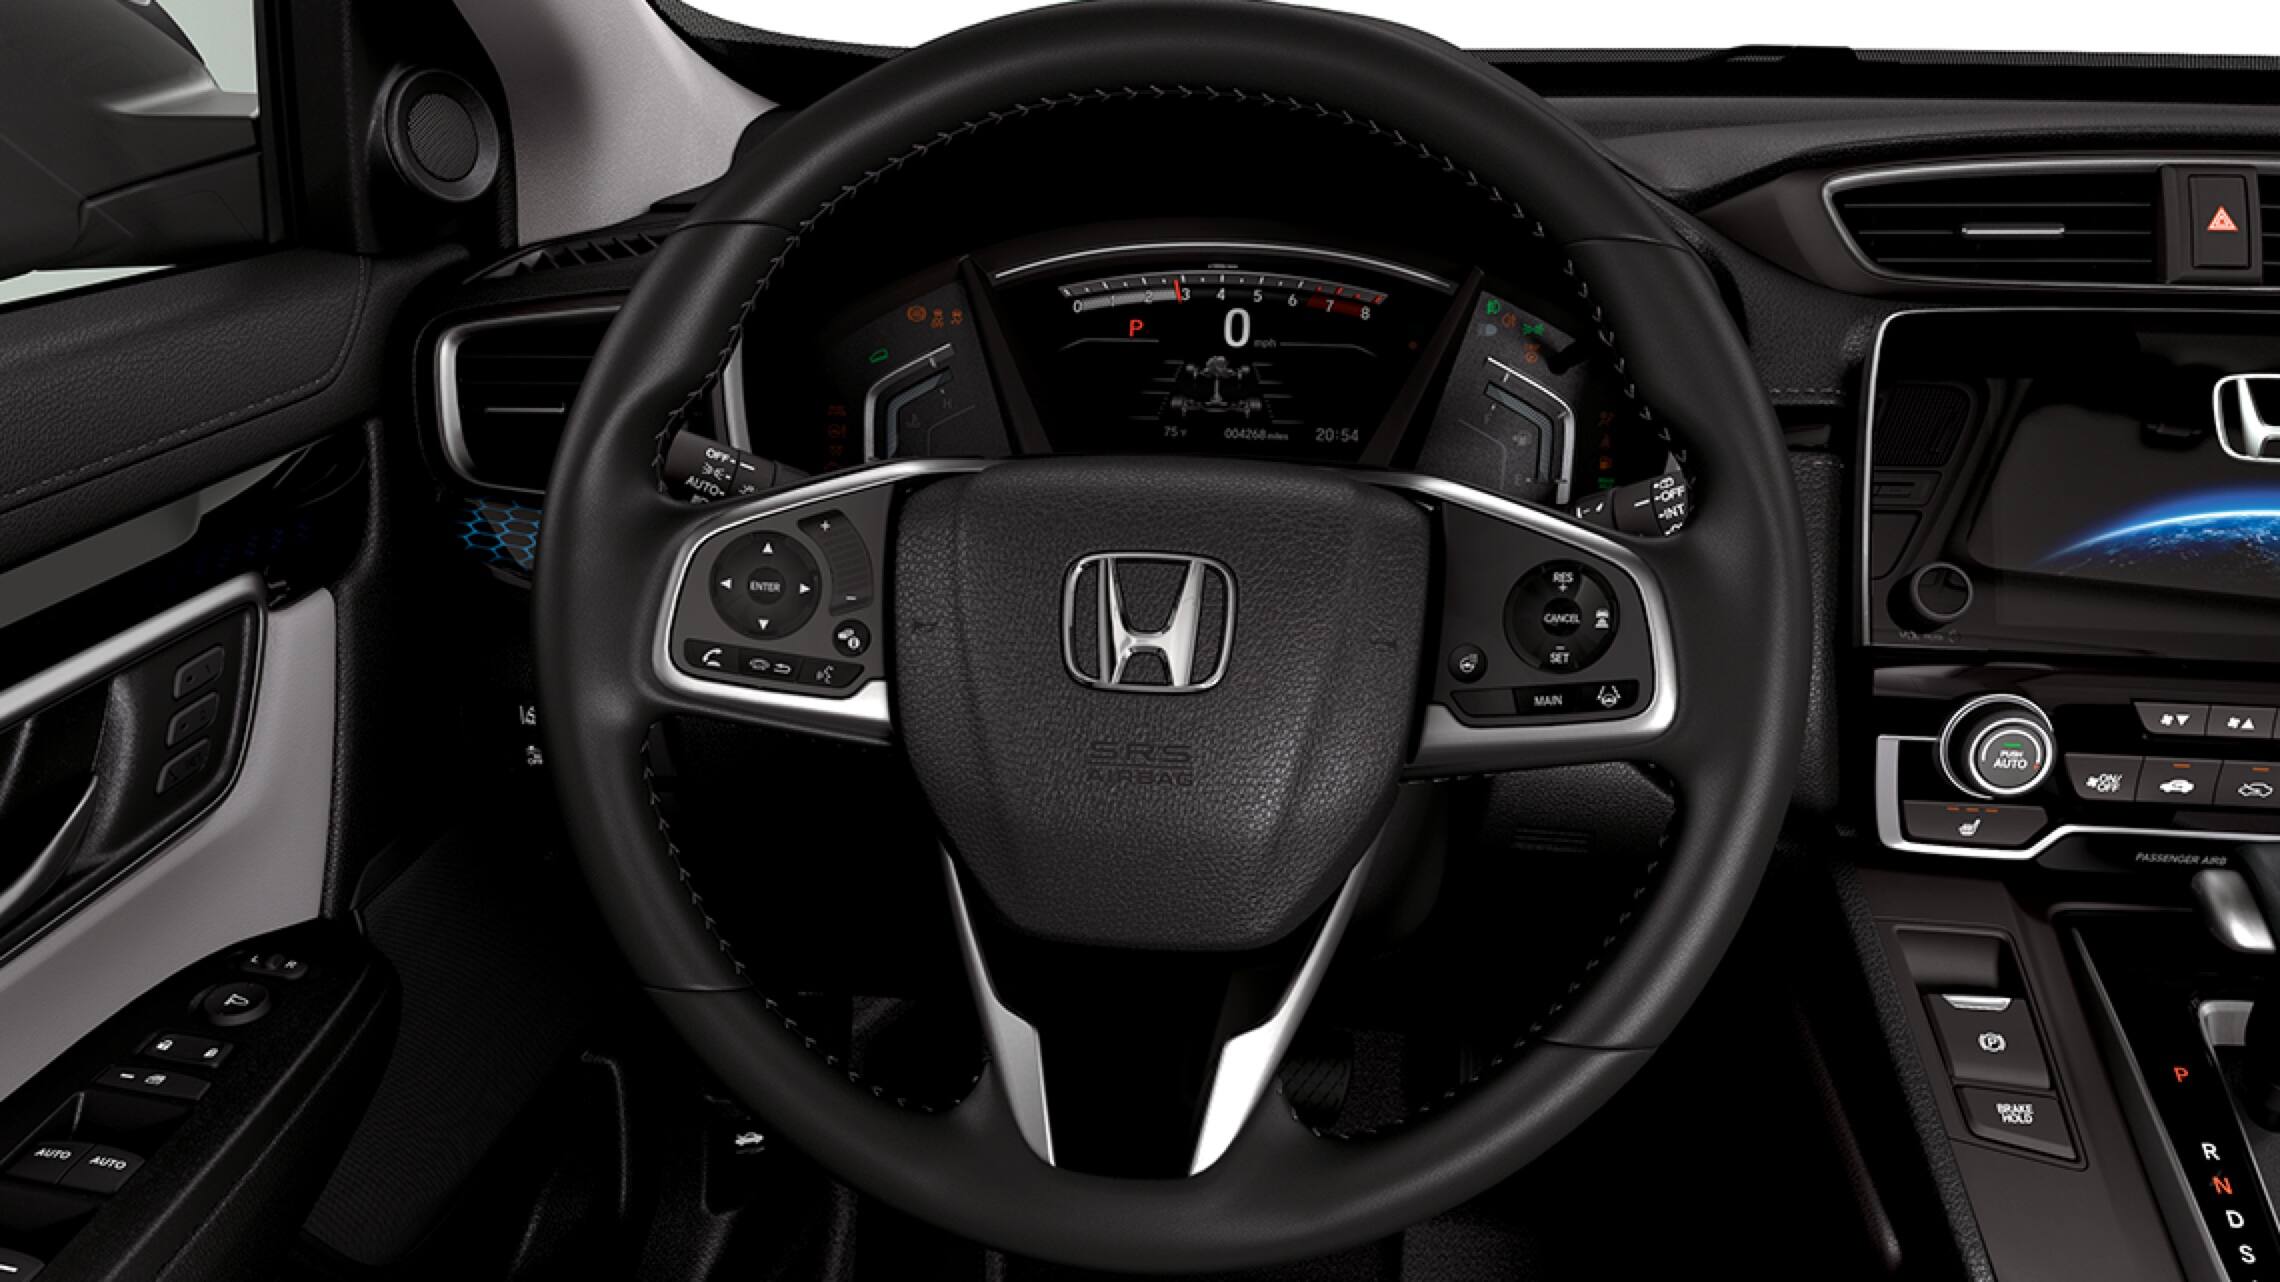 2019 Honda CR-V interior with Honda Genuine Accessory heated steering wheel and control switch. 